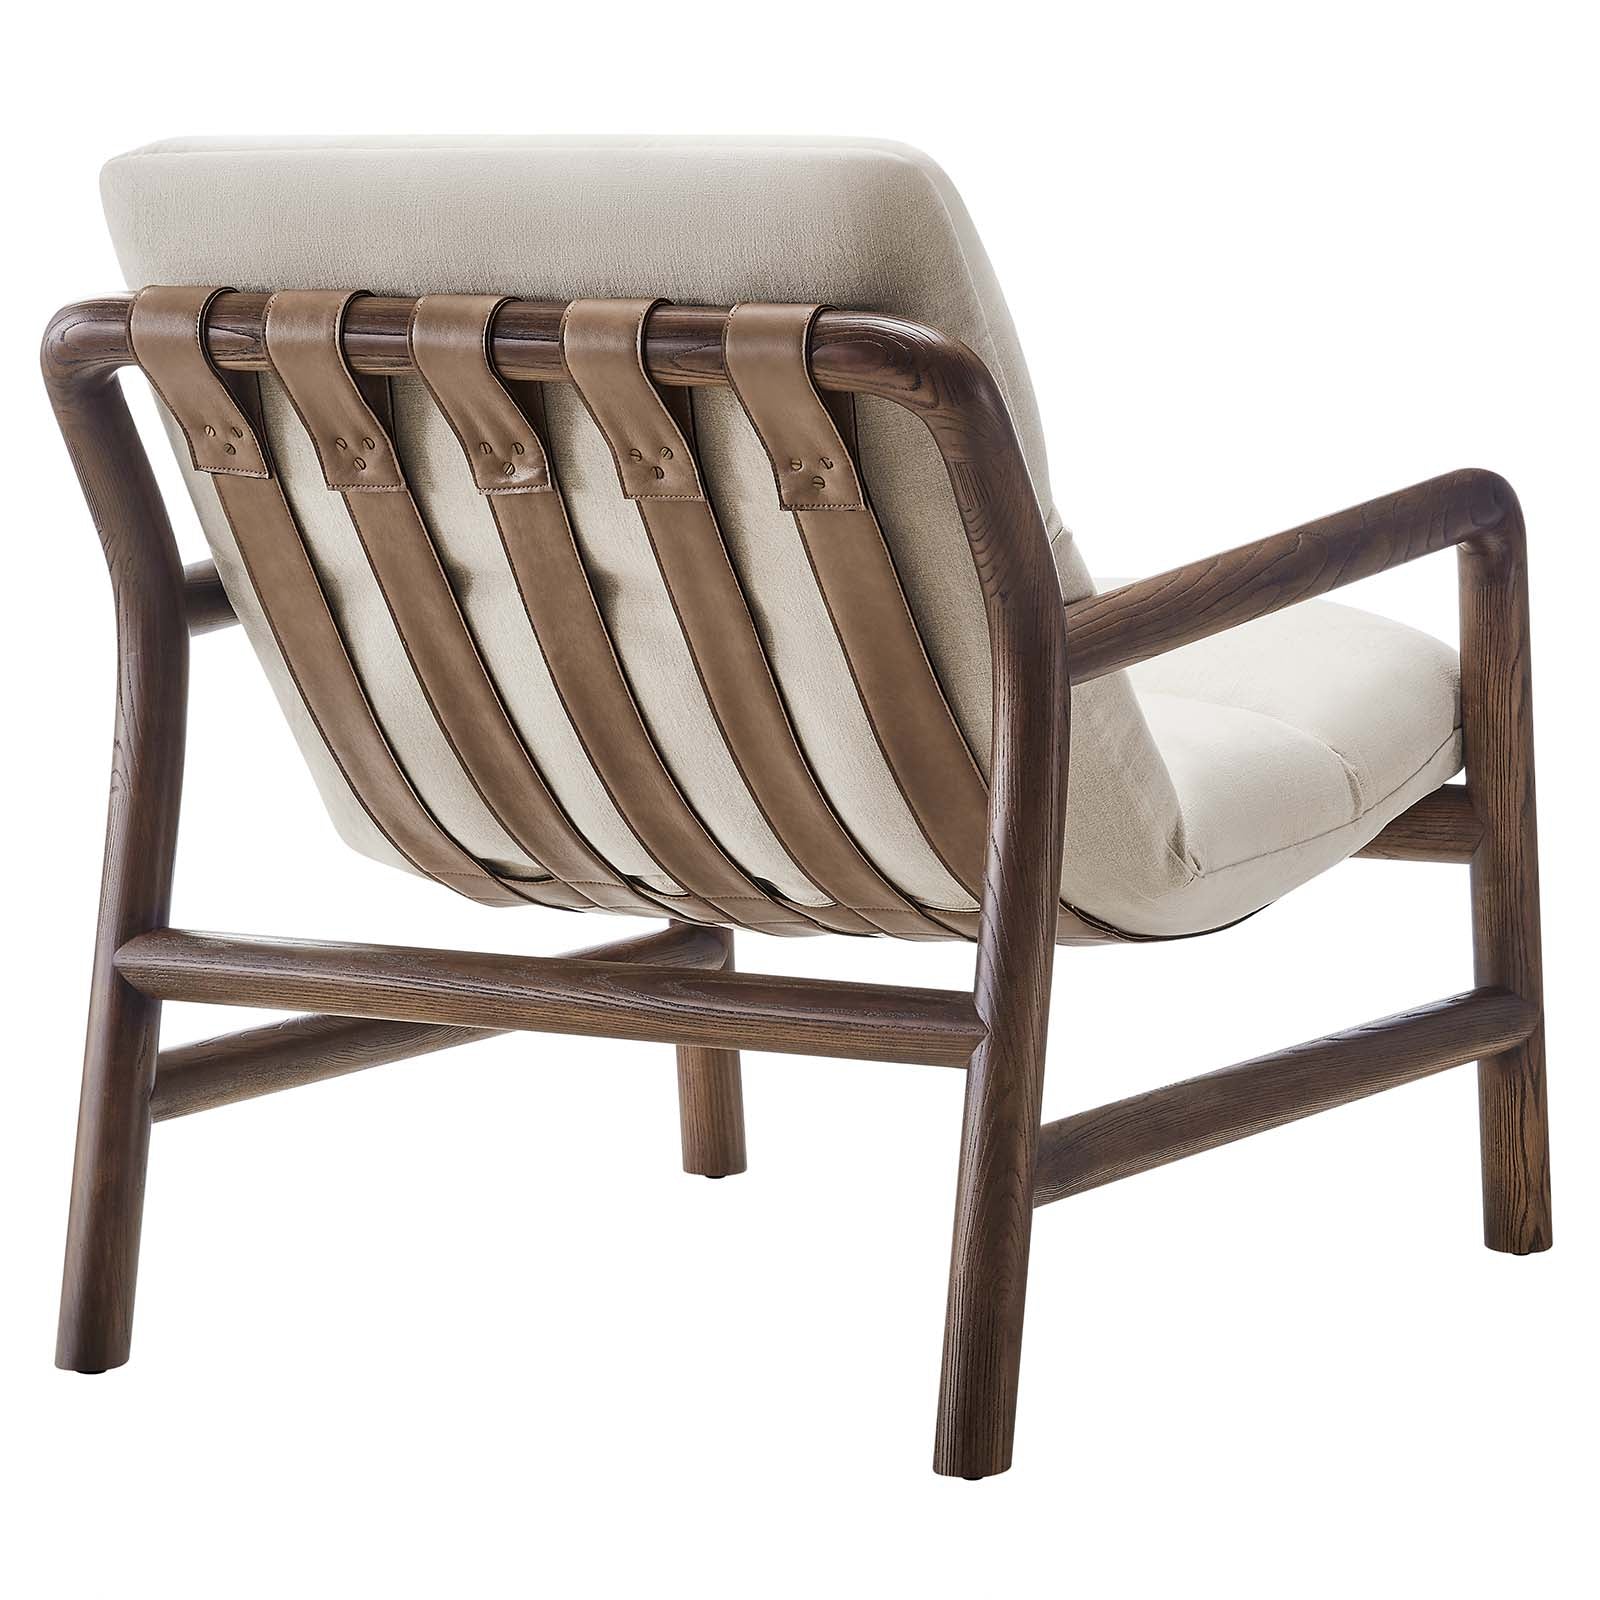 Paxton Wood Sling Chair - Elite Maison